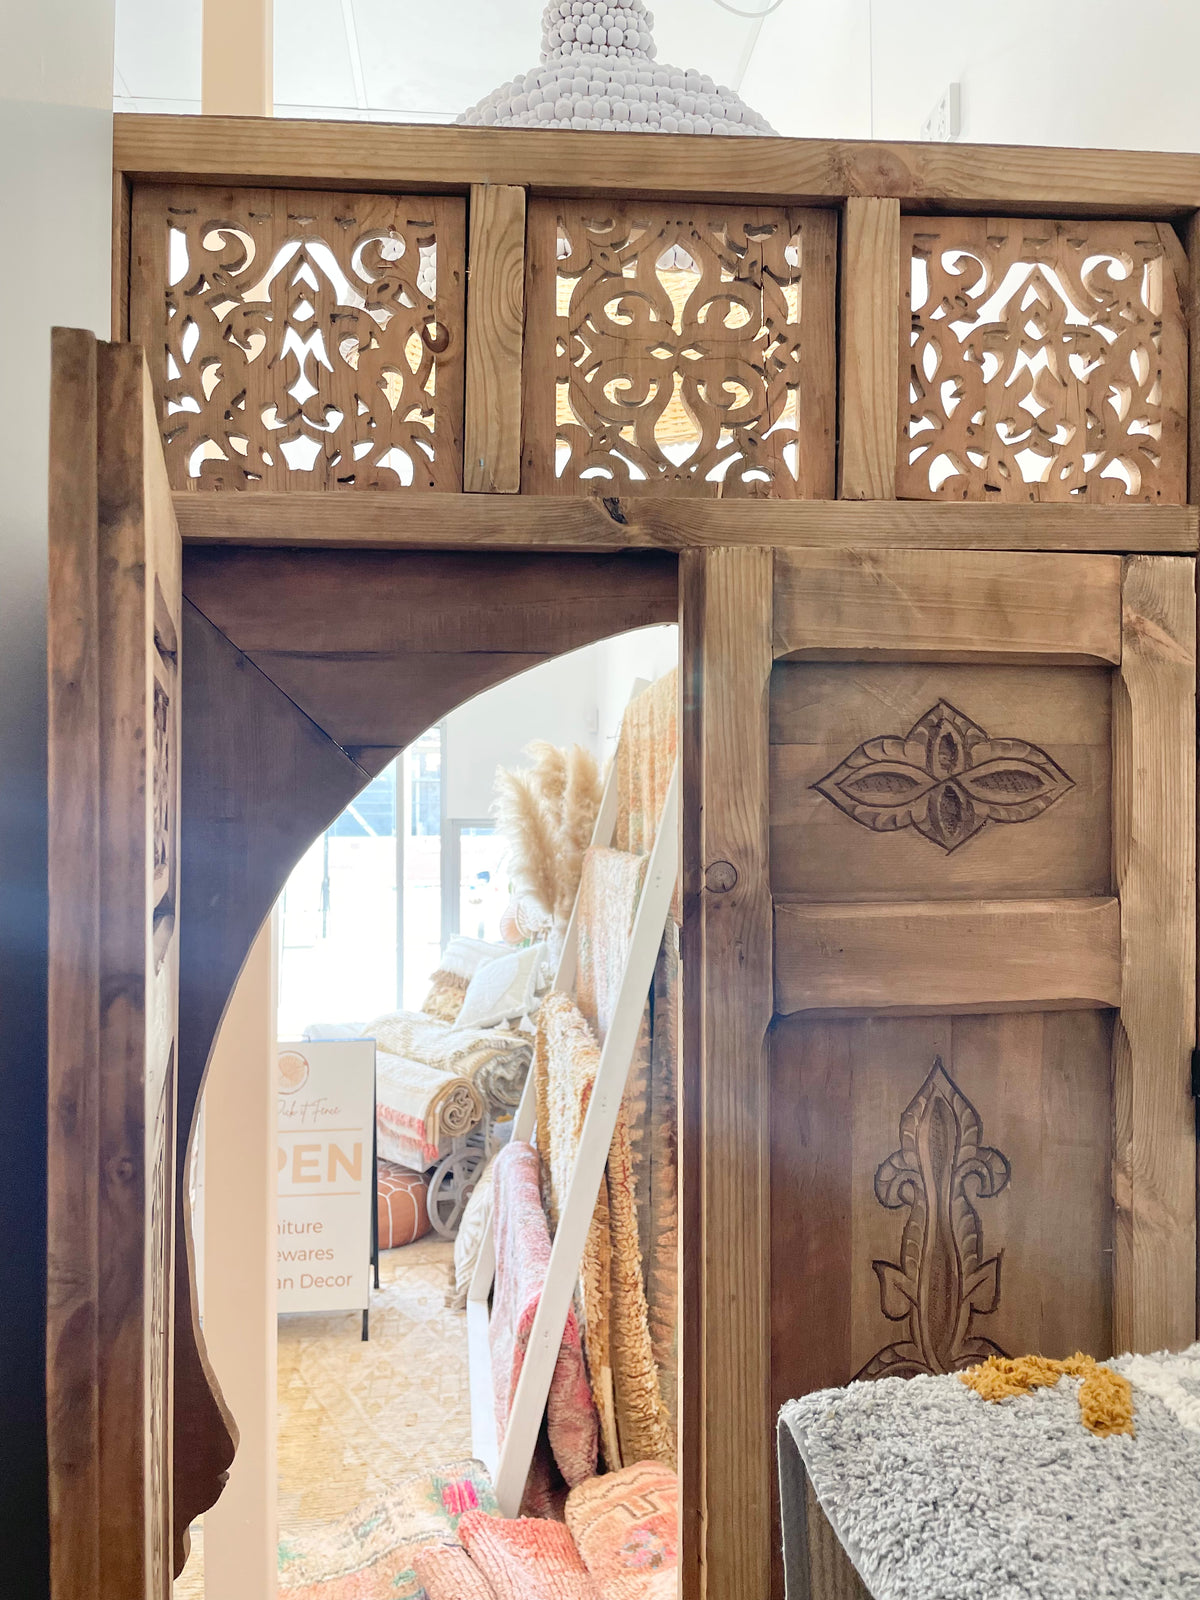 Hand Carved Moroccan Arched Cedar Wood Door - Preorder Only